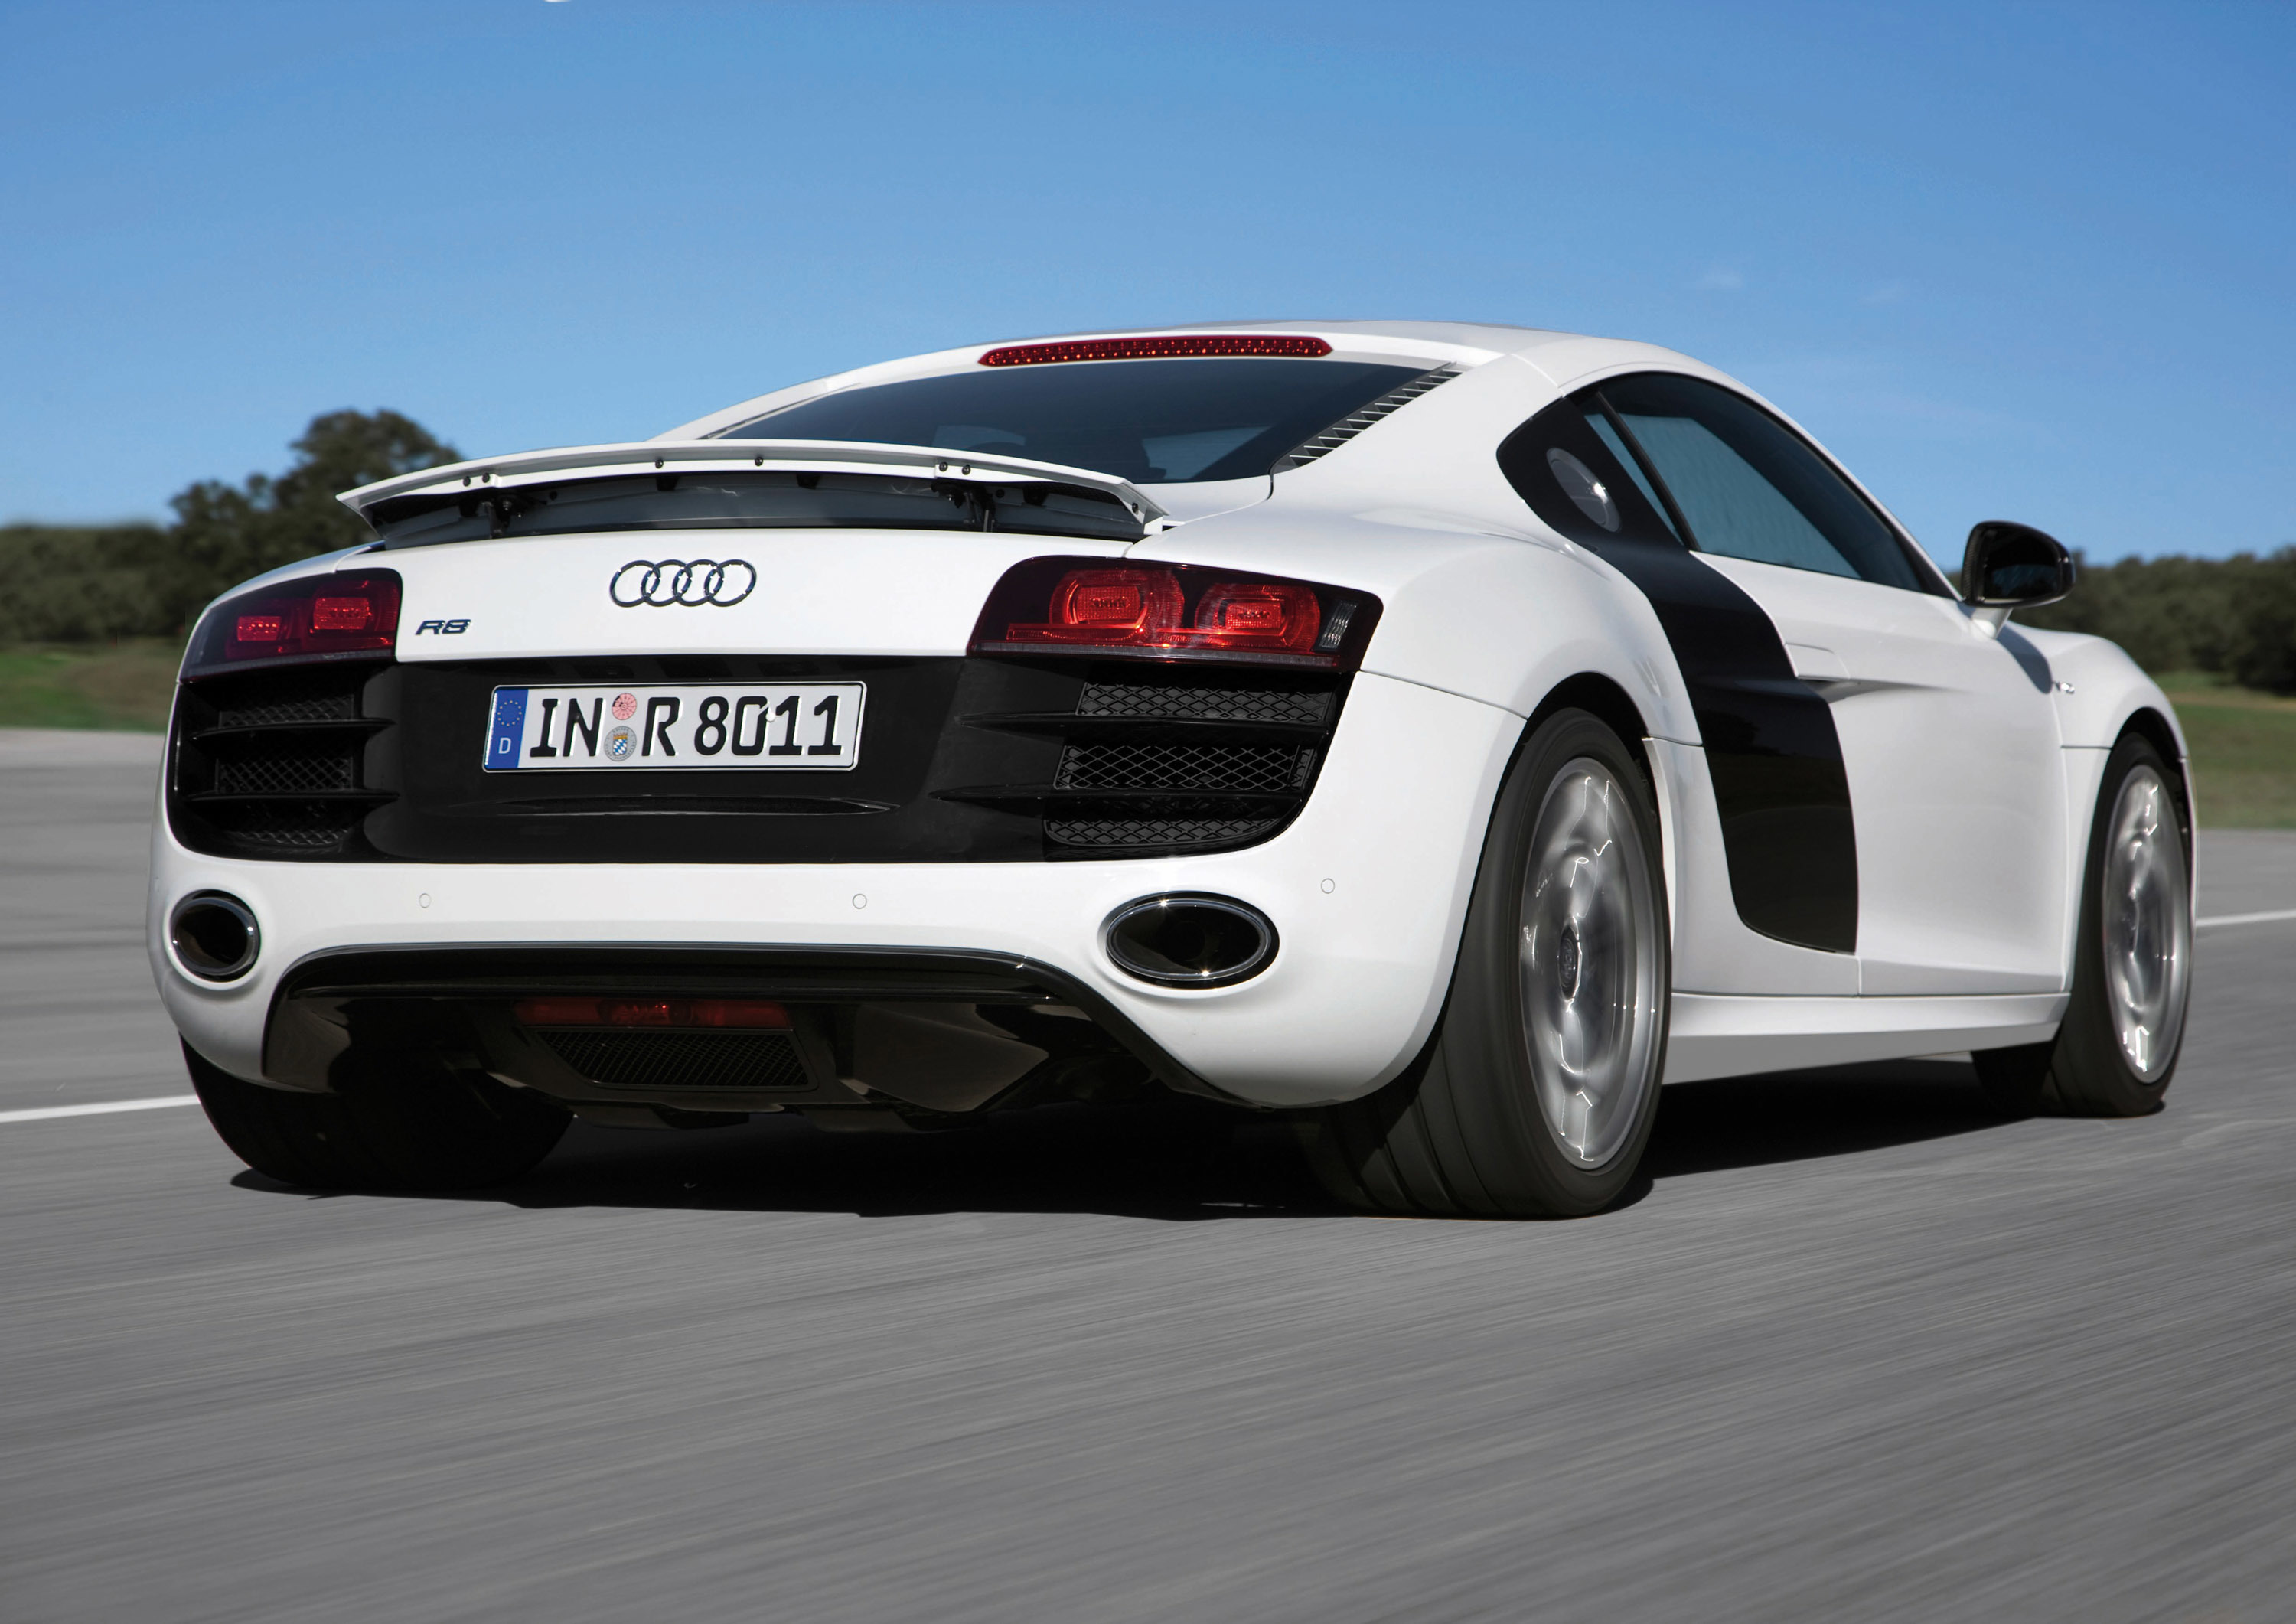 Cars Wallpapers on White Cars Audi Backview R8 Side View Hd Wallpaper   Cars   Trucks